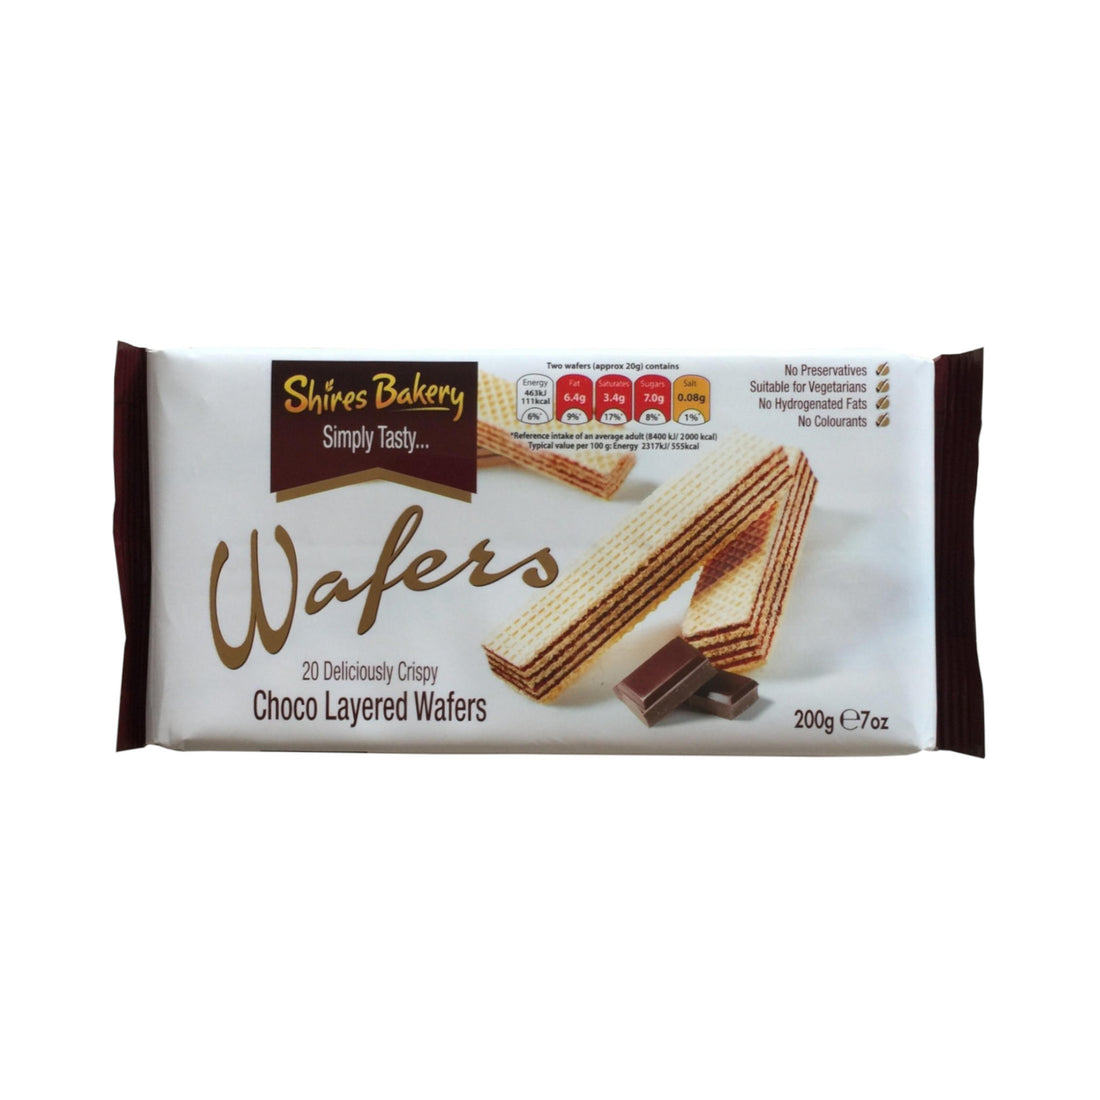 Shires Bakery Choco Layered Wafers 200g